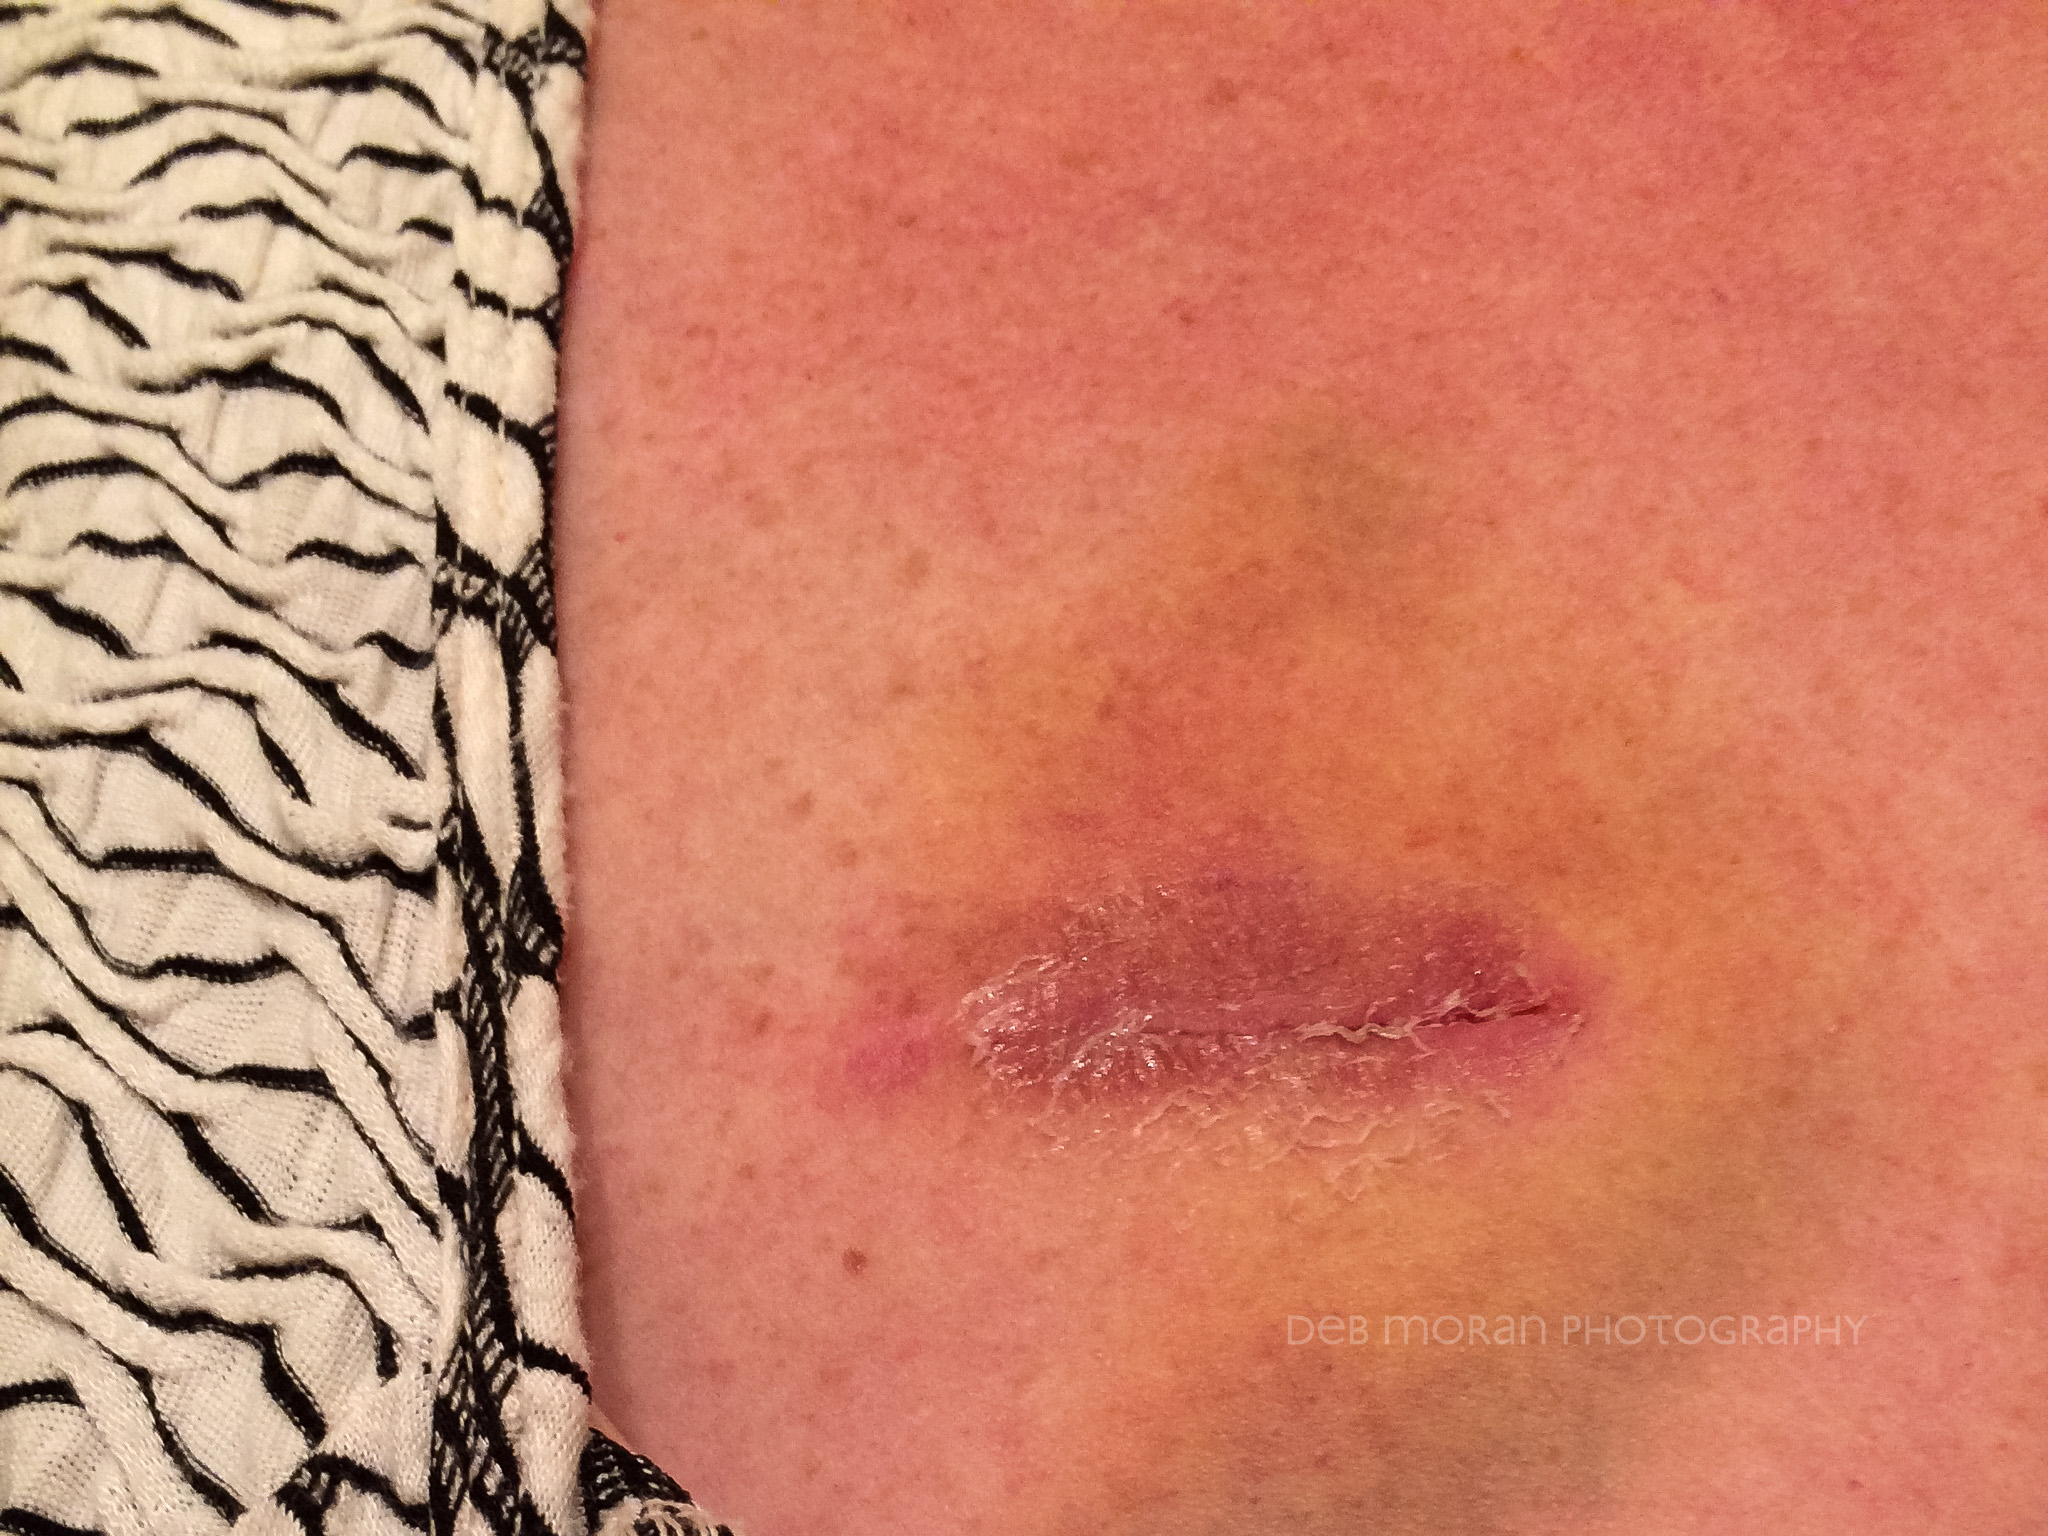 My deportation incision is healing quite well. A bit of bruising, glue sloughing off. Looks as well as I could expect.